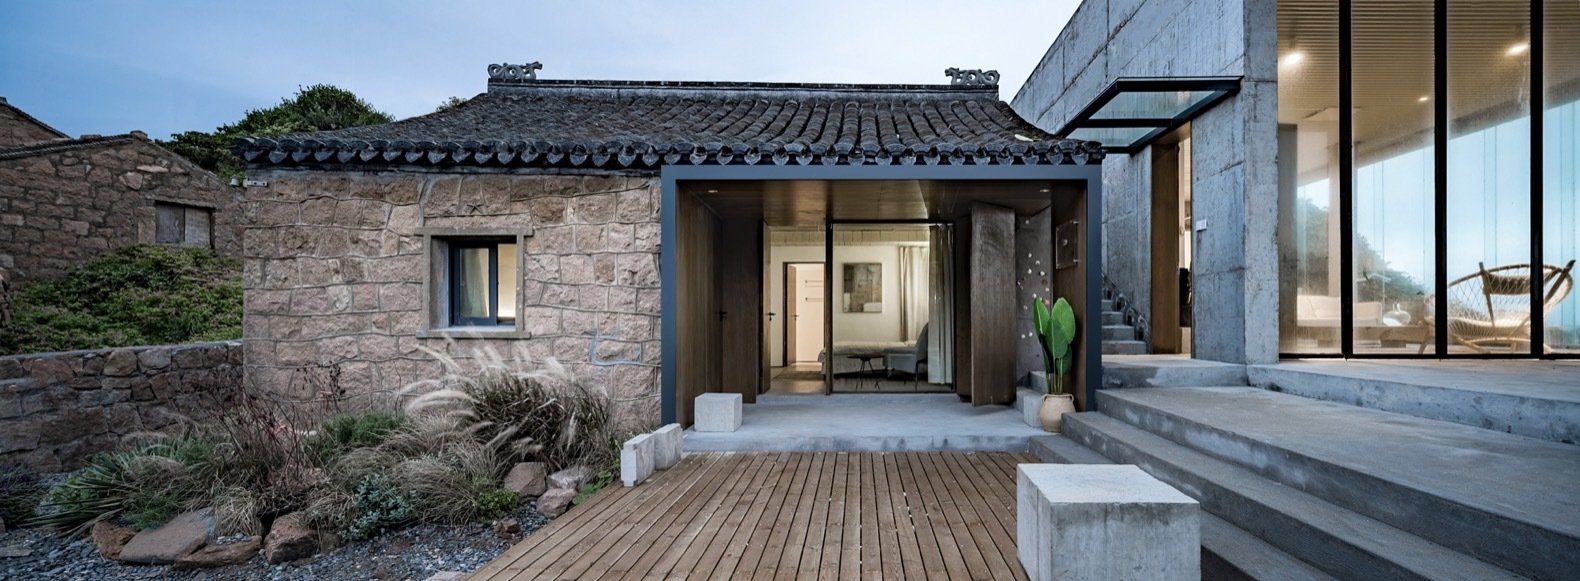 the-smaller-of-the-two-existing-buildings-this-renovated-structure-houses-two-bedrooms-a-glass-overhang-was-installed-above-the-pas